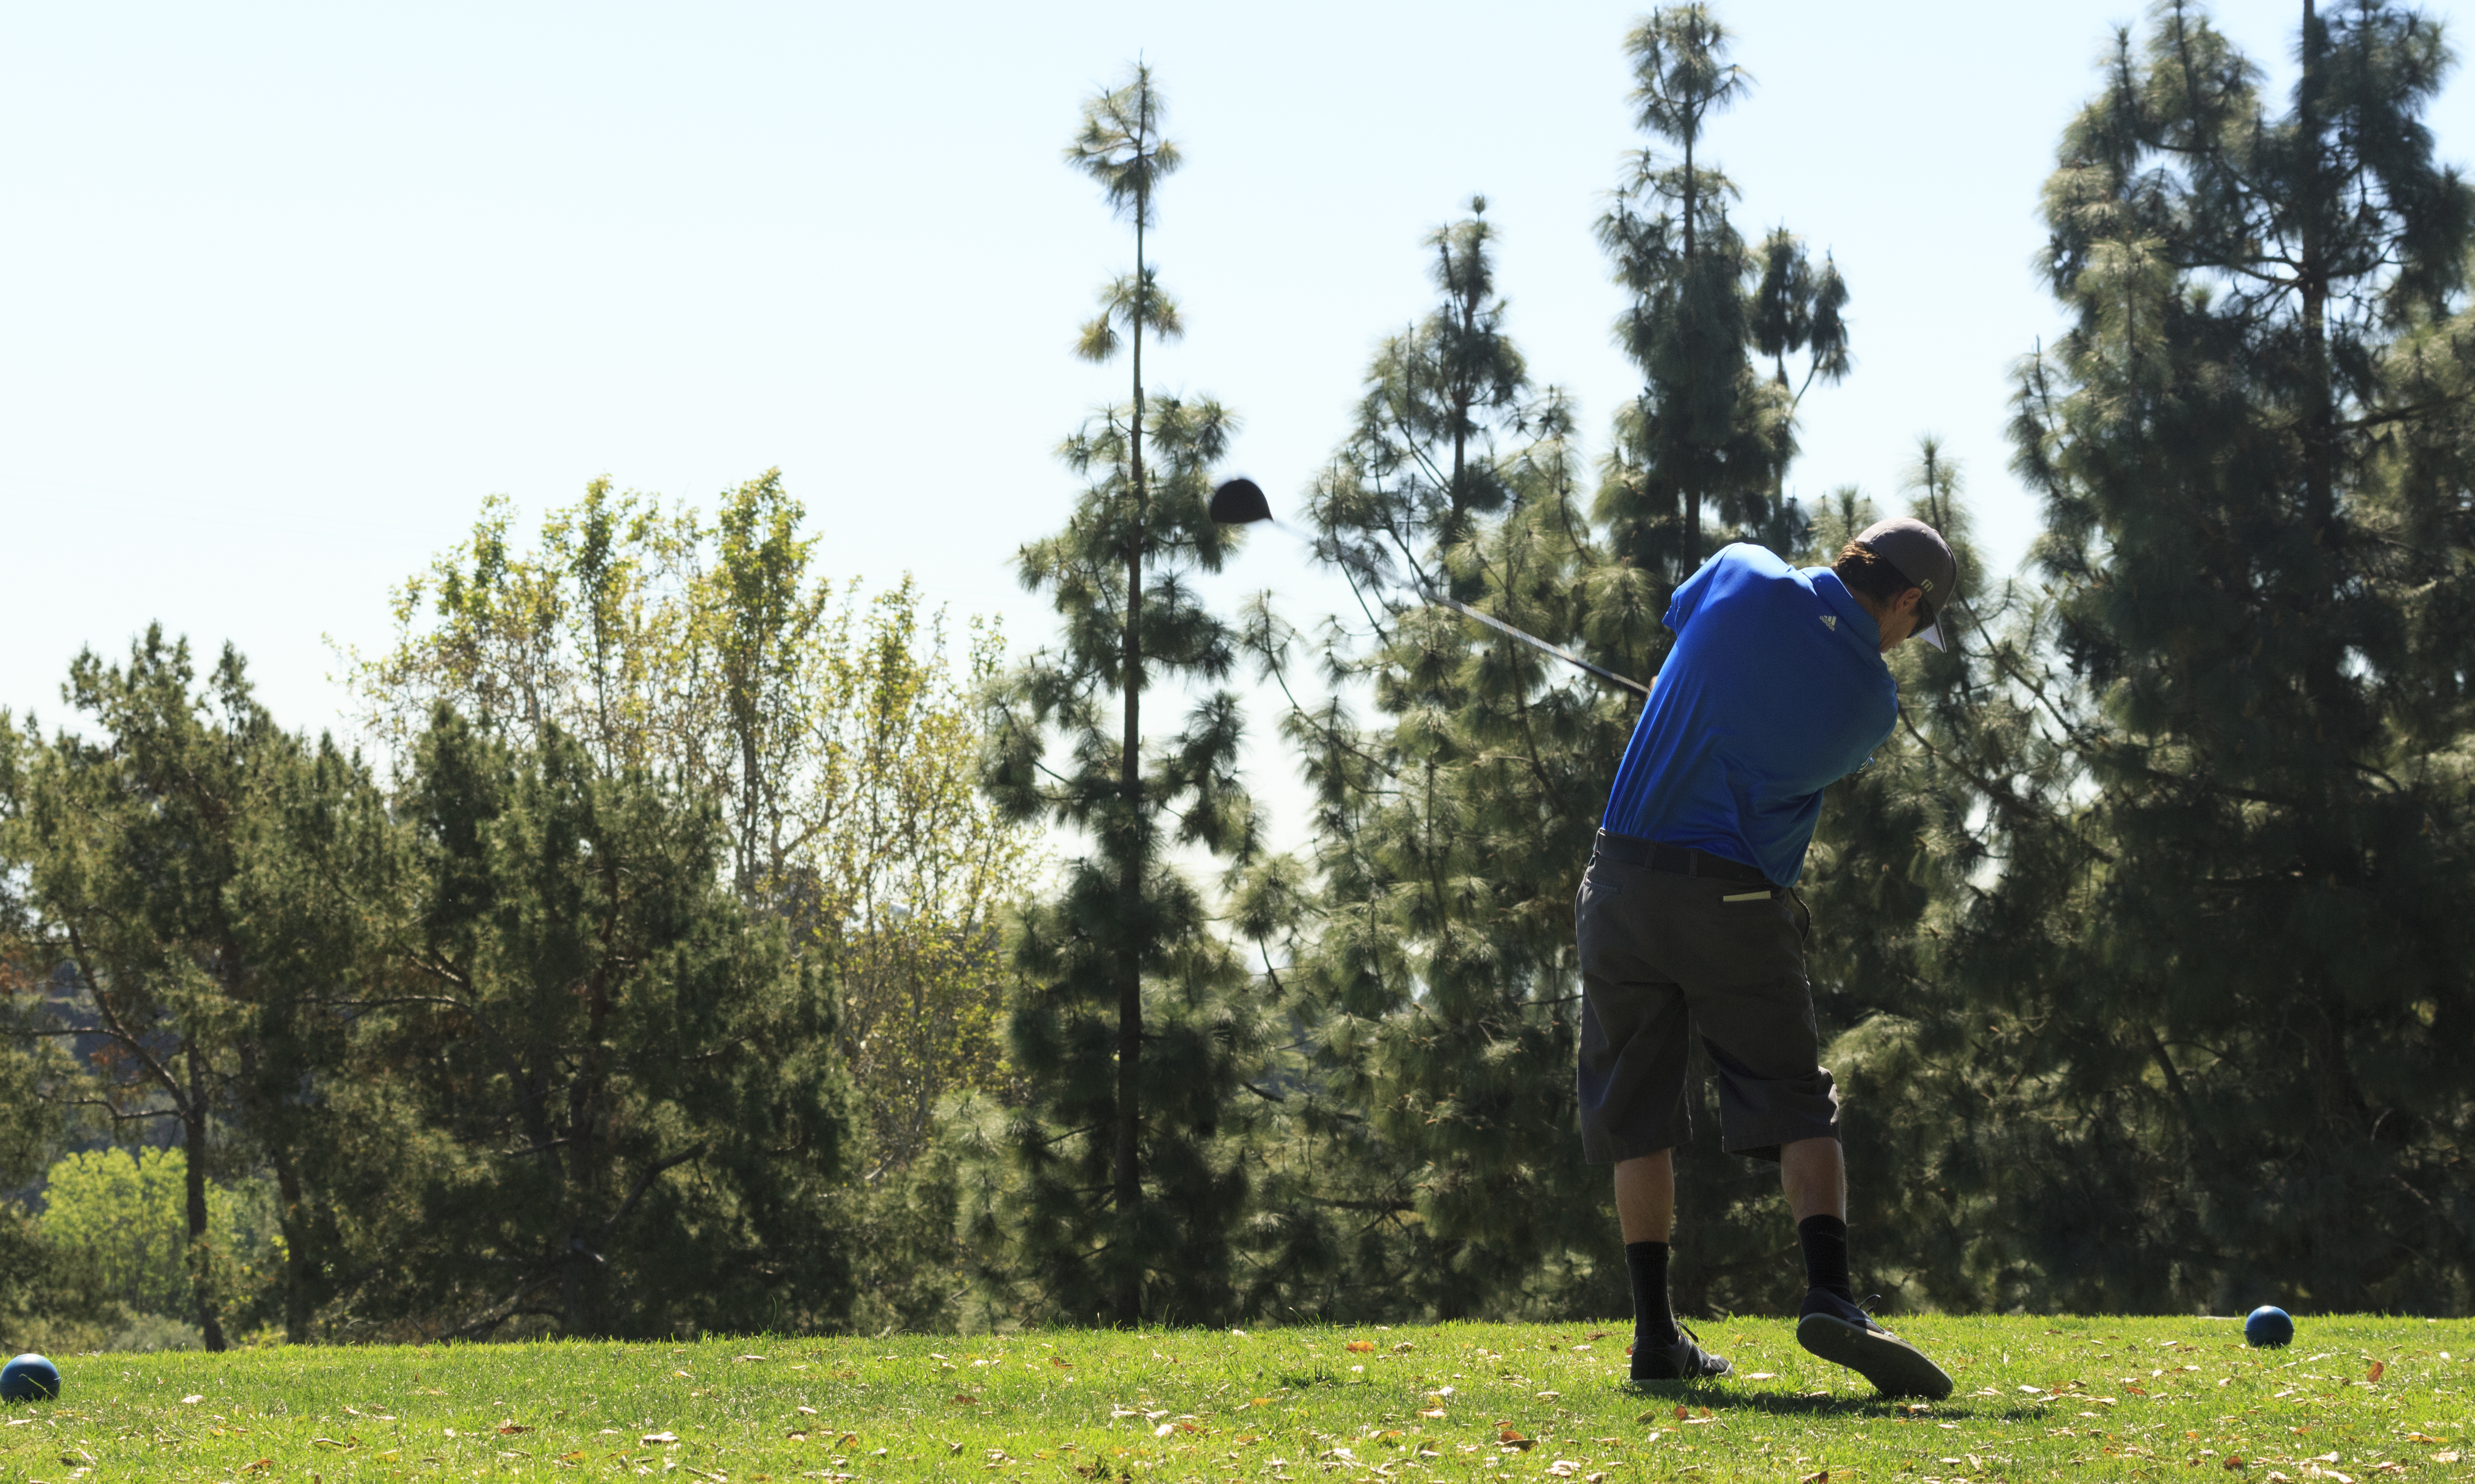 Men’s golf takes fourth in conference, advances to regional playoffs